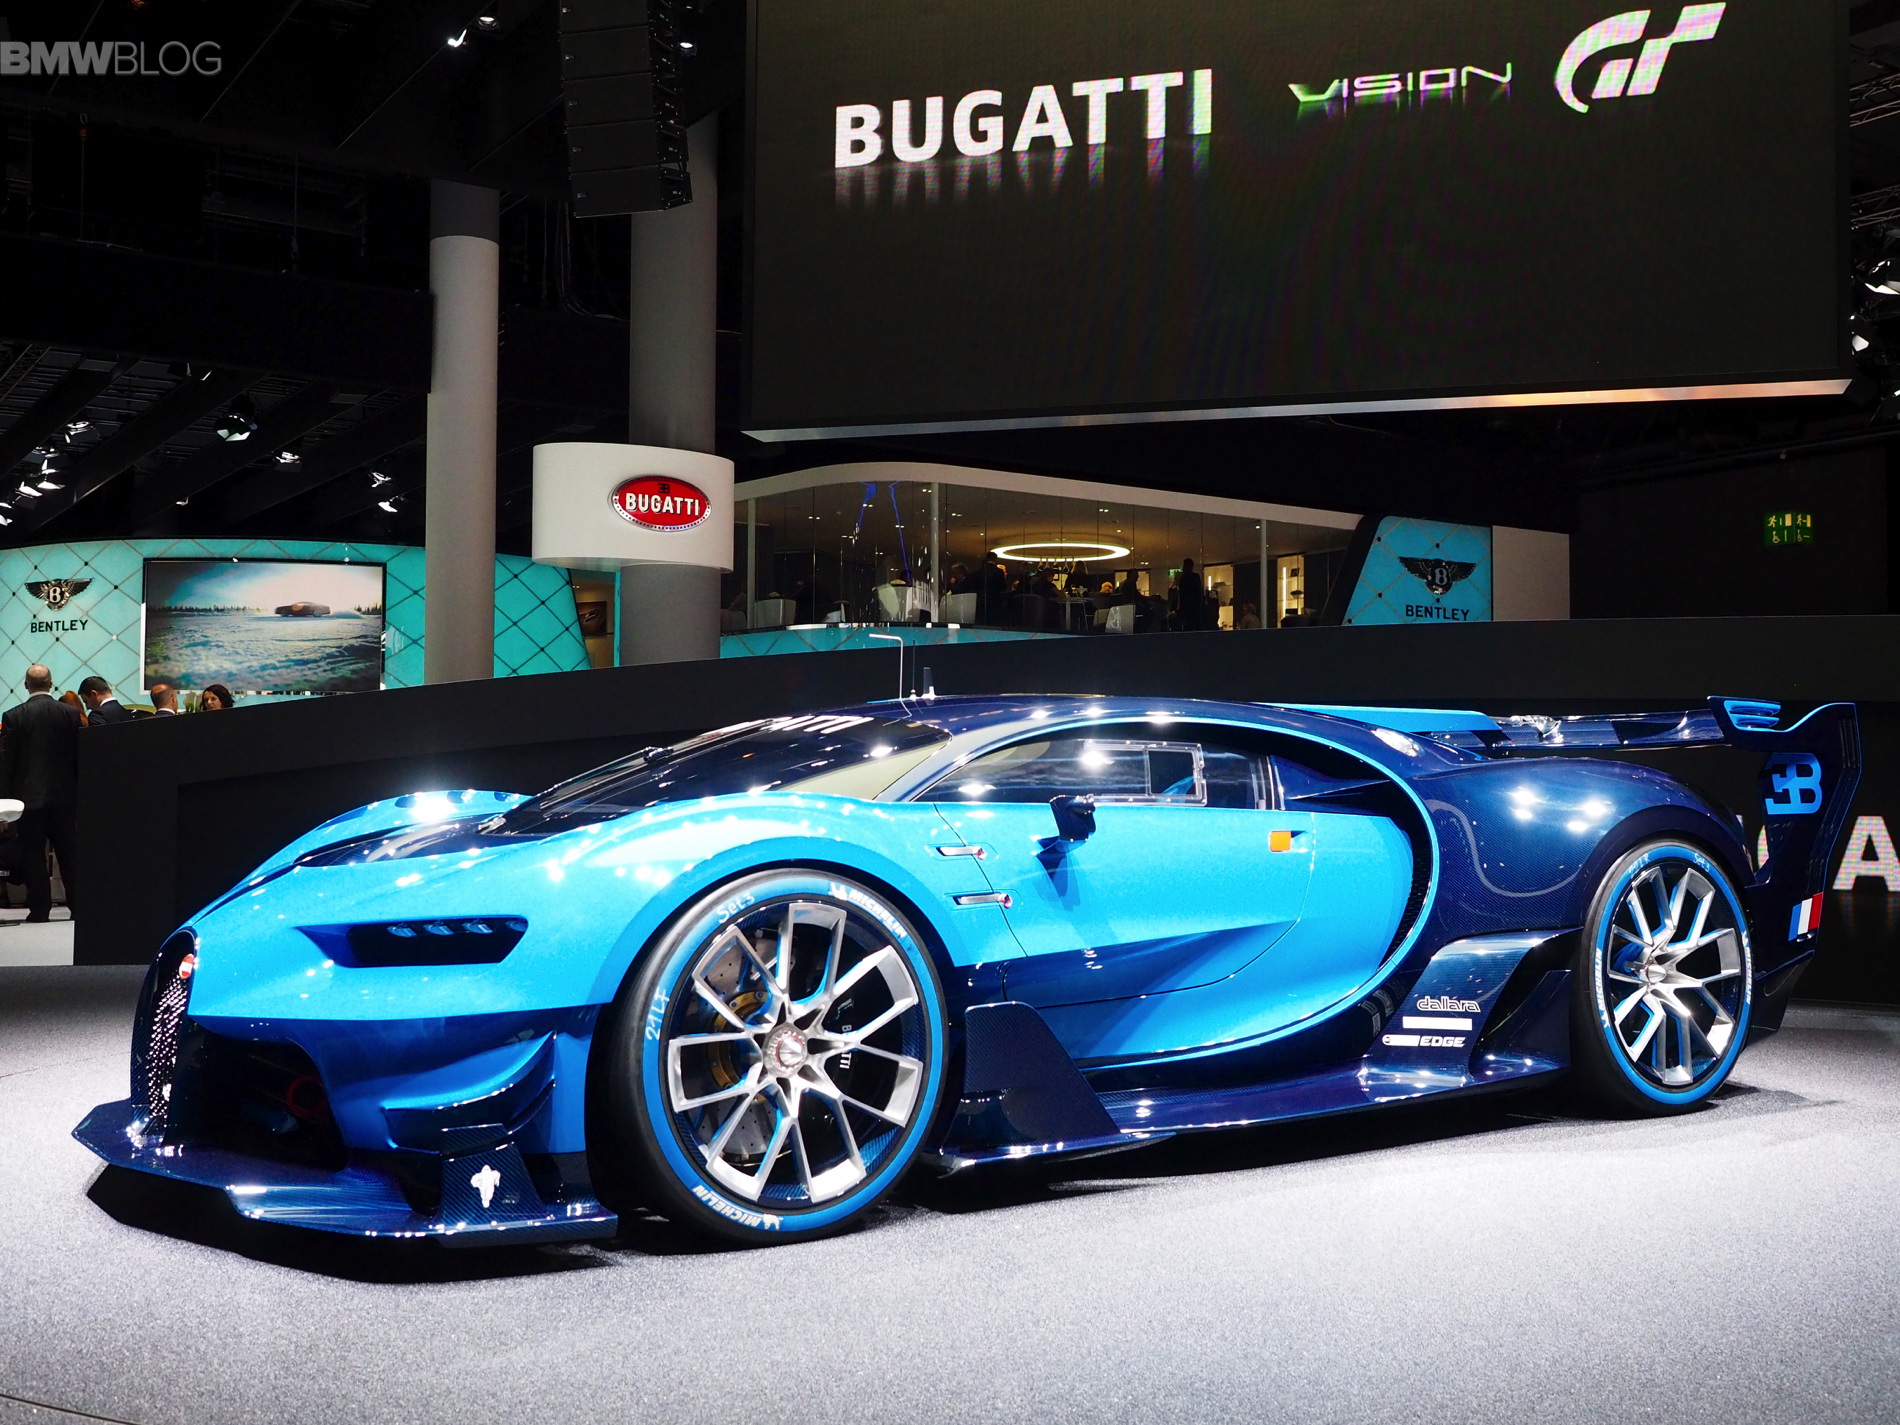 This is the Bugatti Vision Gran Turismo with 250mph top speed